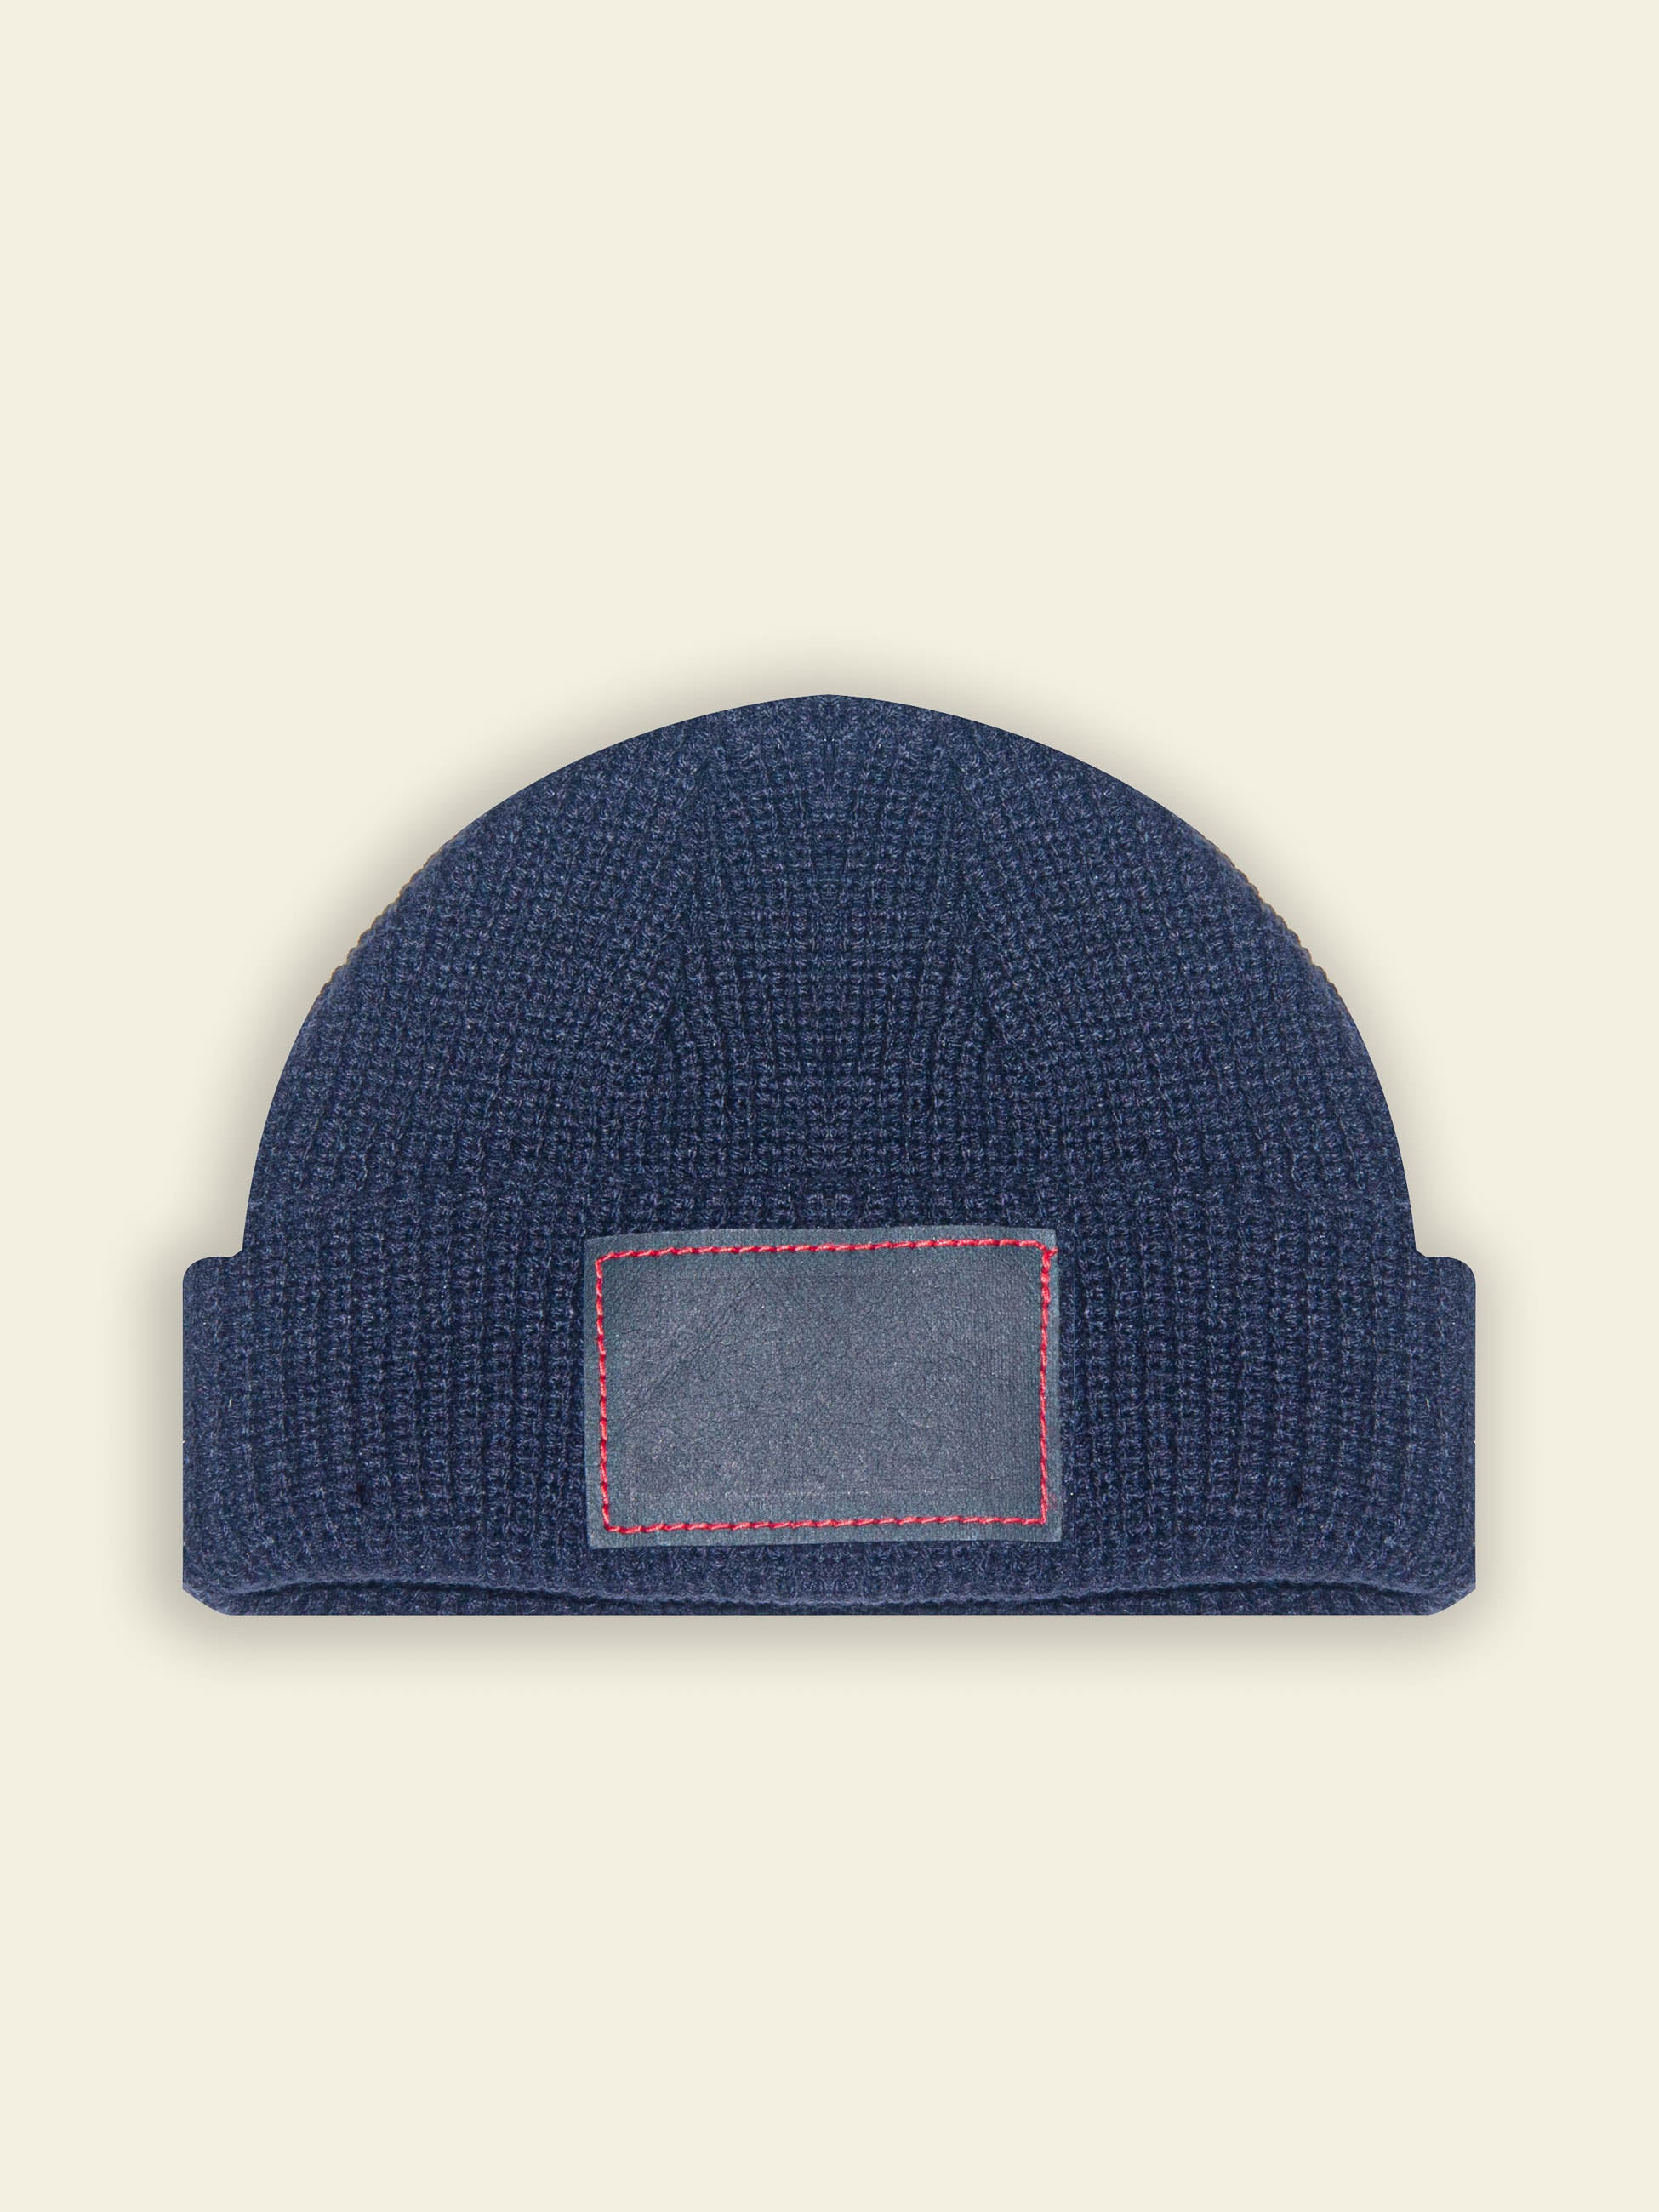 Publik Brand Fisherman Beanie College Navy, all made in USA, Front